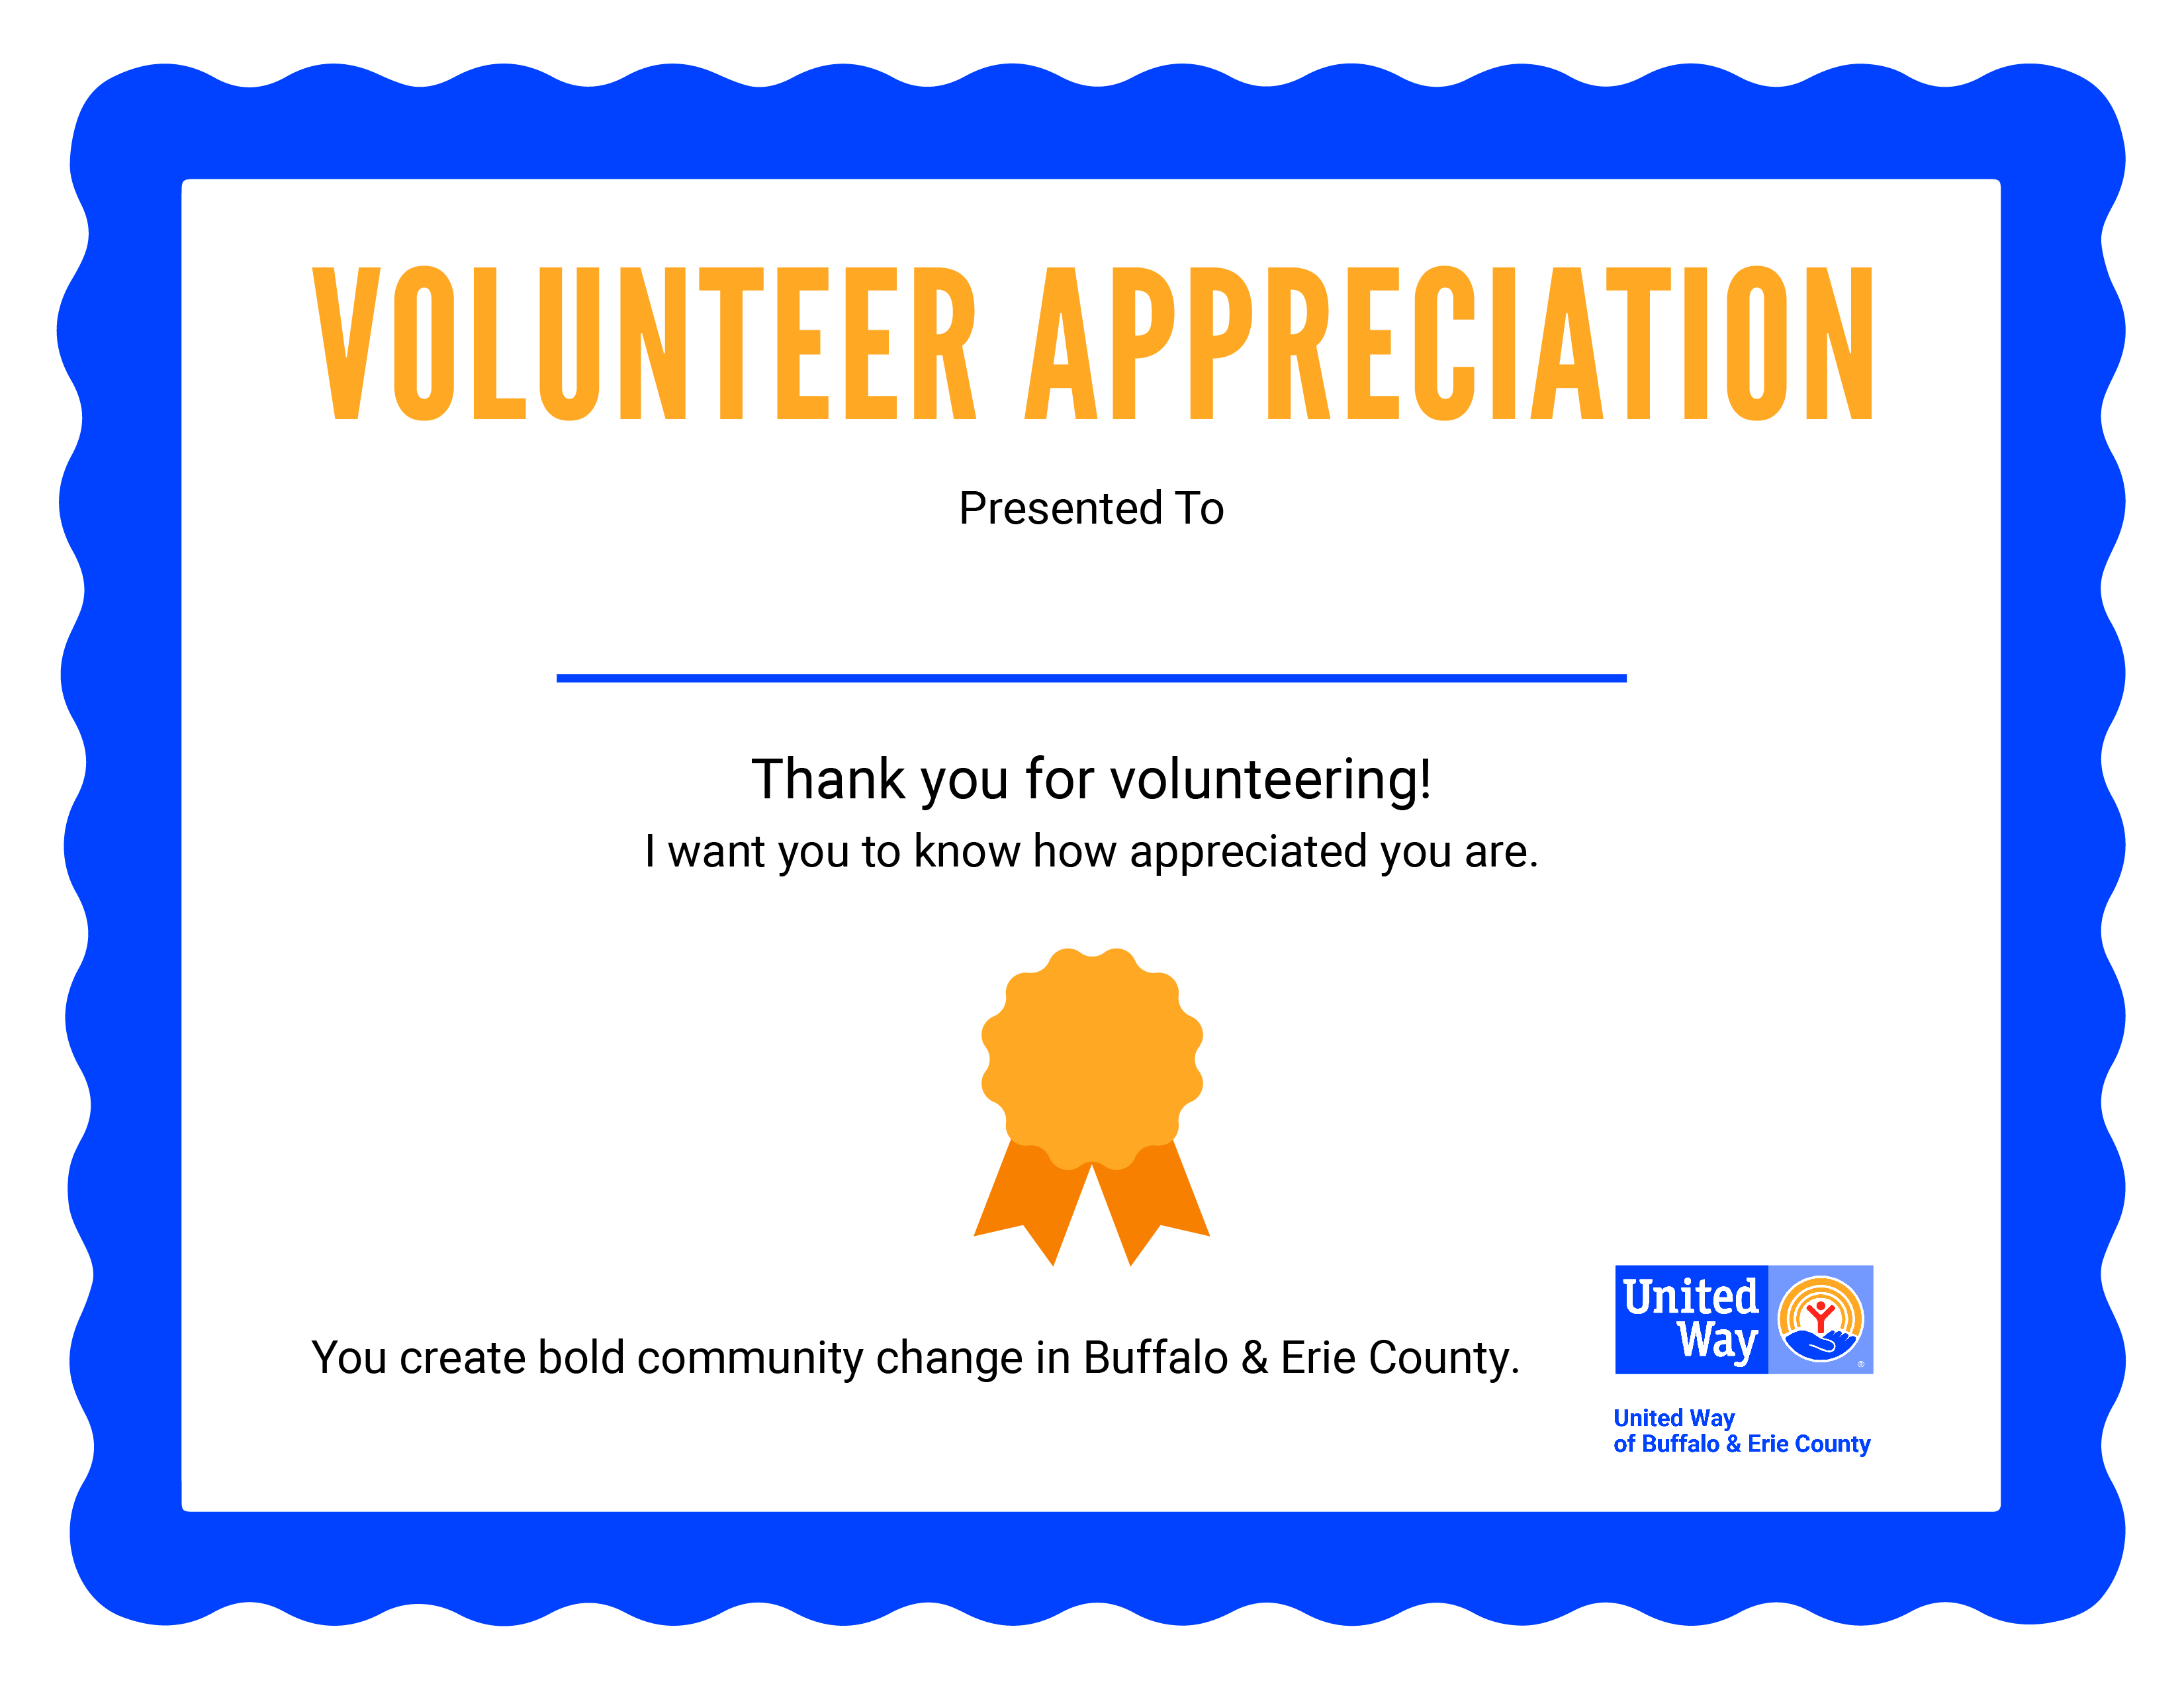 Volunteer United Way of Buffalo and Erie County